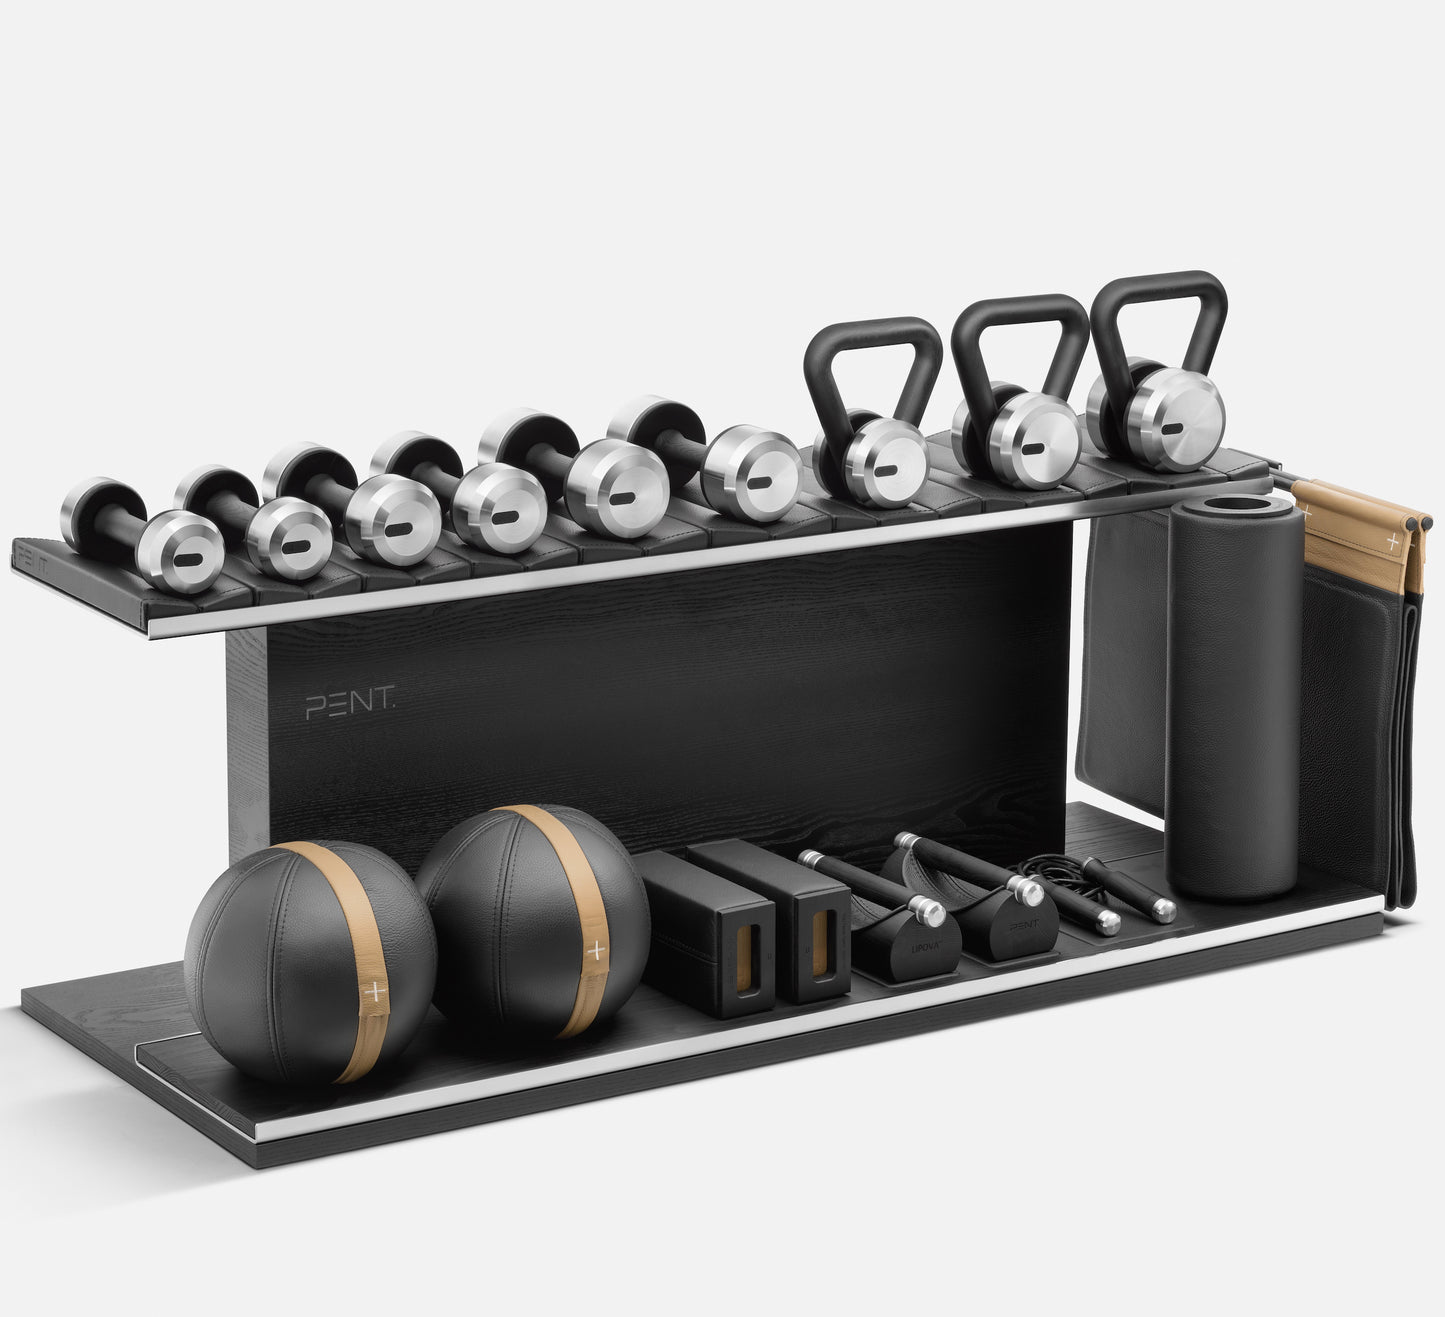 Compact PENT Combo Ana: Handcrafted luxury home gym equipment combo made with natural leather, sustainably sourced wood, and stainless steelIncludes skipping rope, push-up bars, yoga mat, dumbbells, kettlebells, roller, yoga blocks, medicine balls.